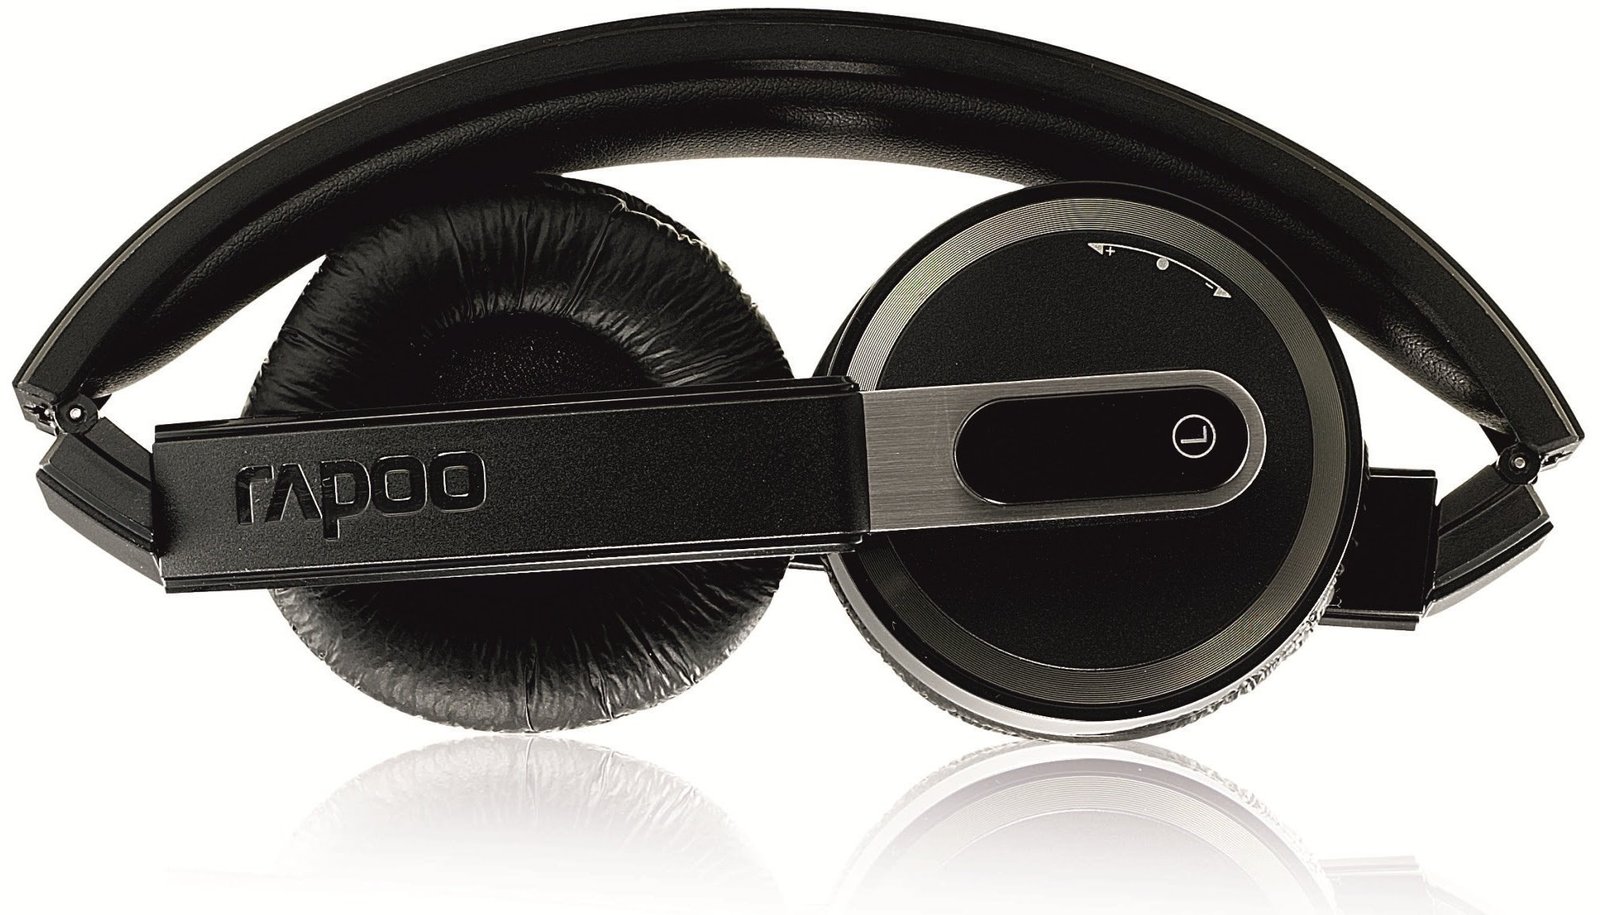 Rapoo H3080, a portable USB headphone now available in India for Rs. 6,199